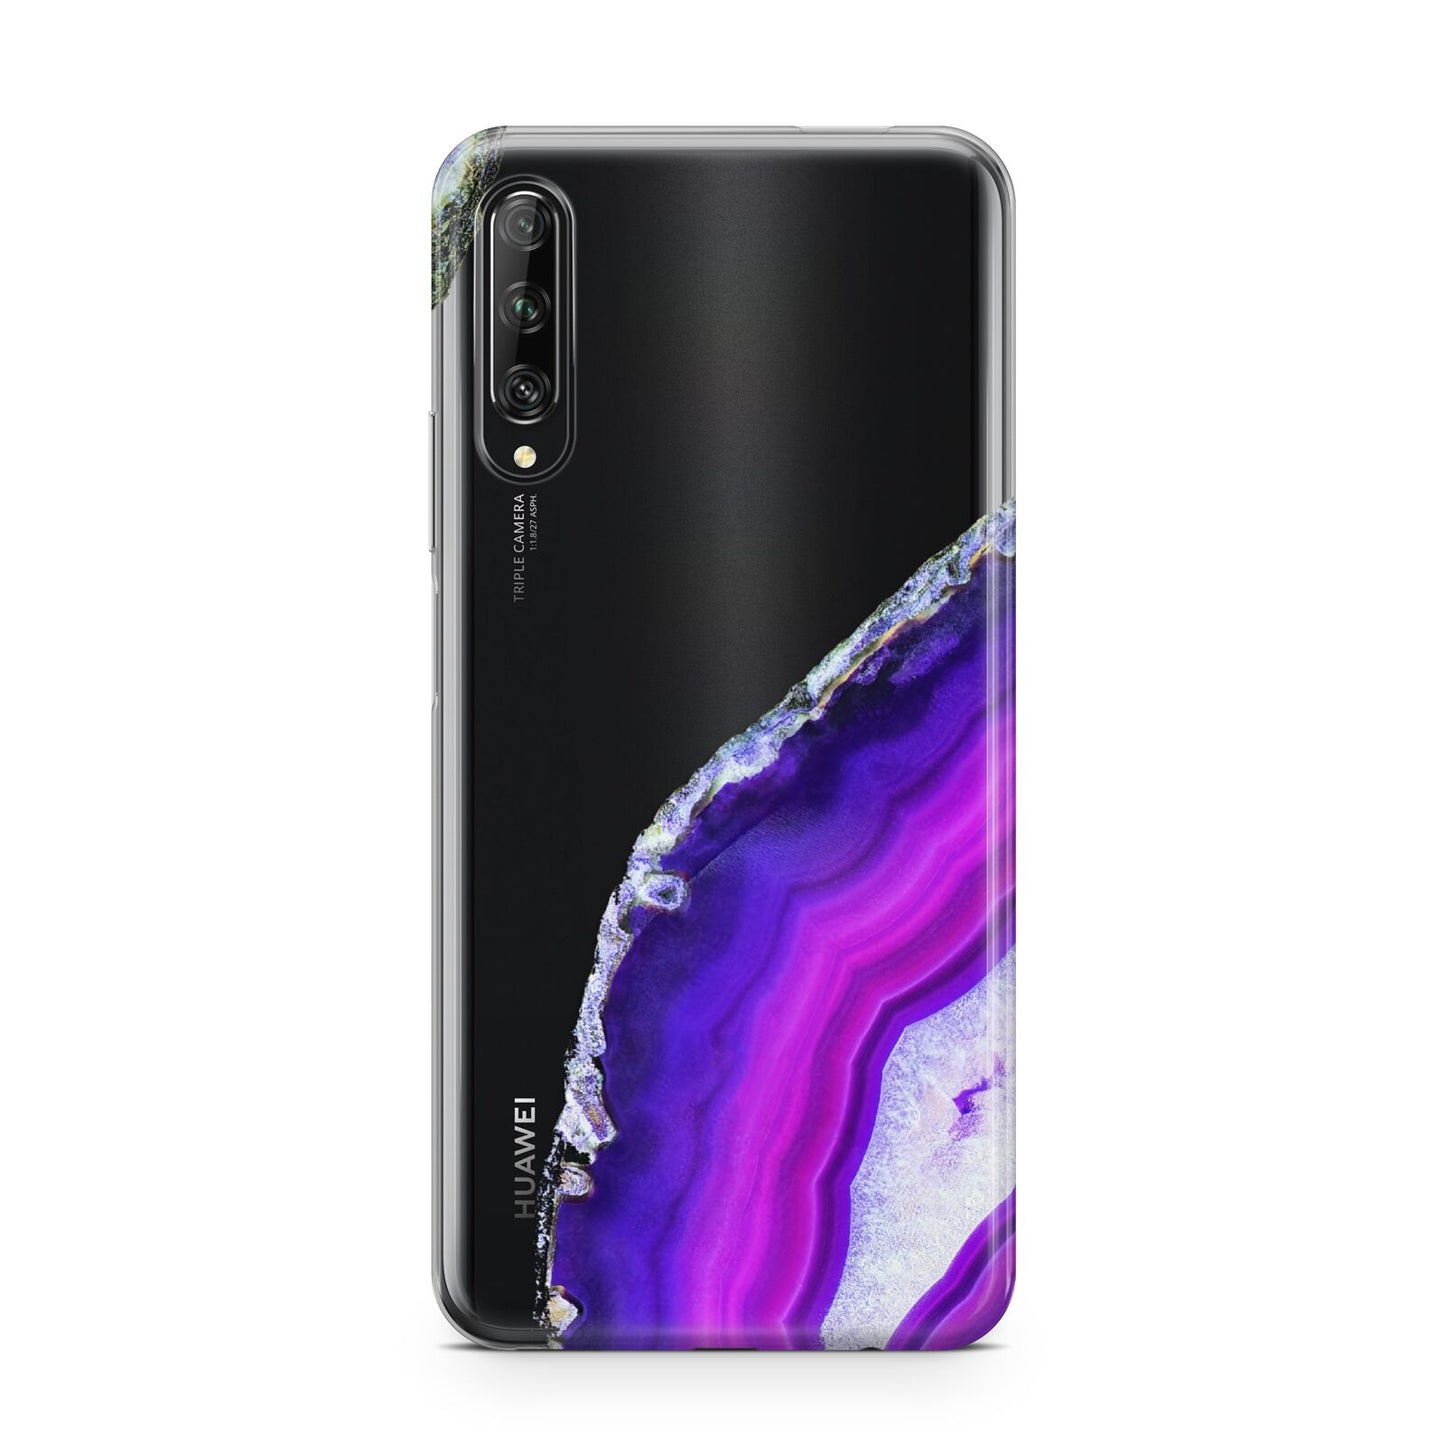 Agate Purple and Pink Huawei P Smart Pro 2019